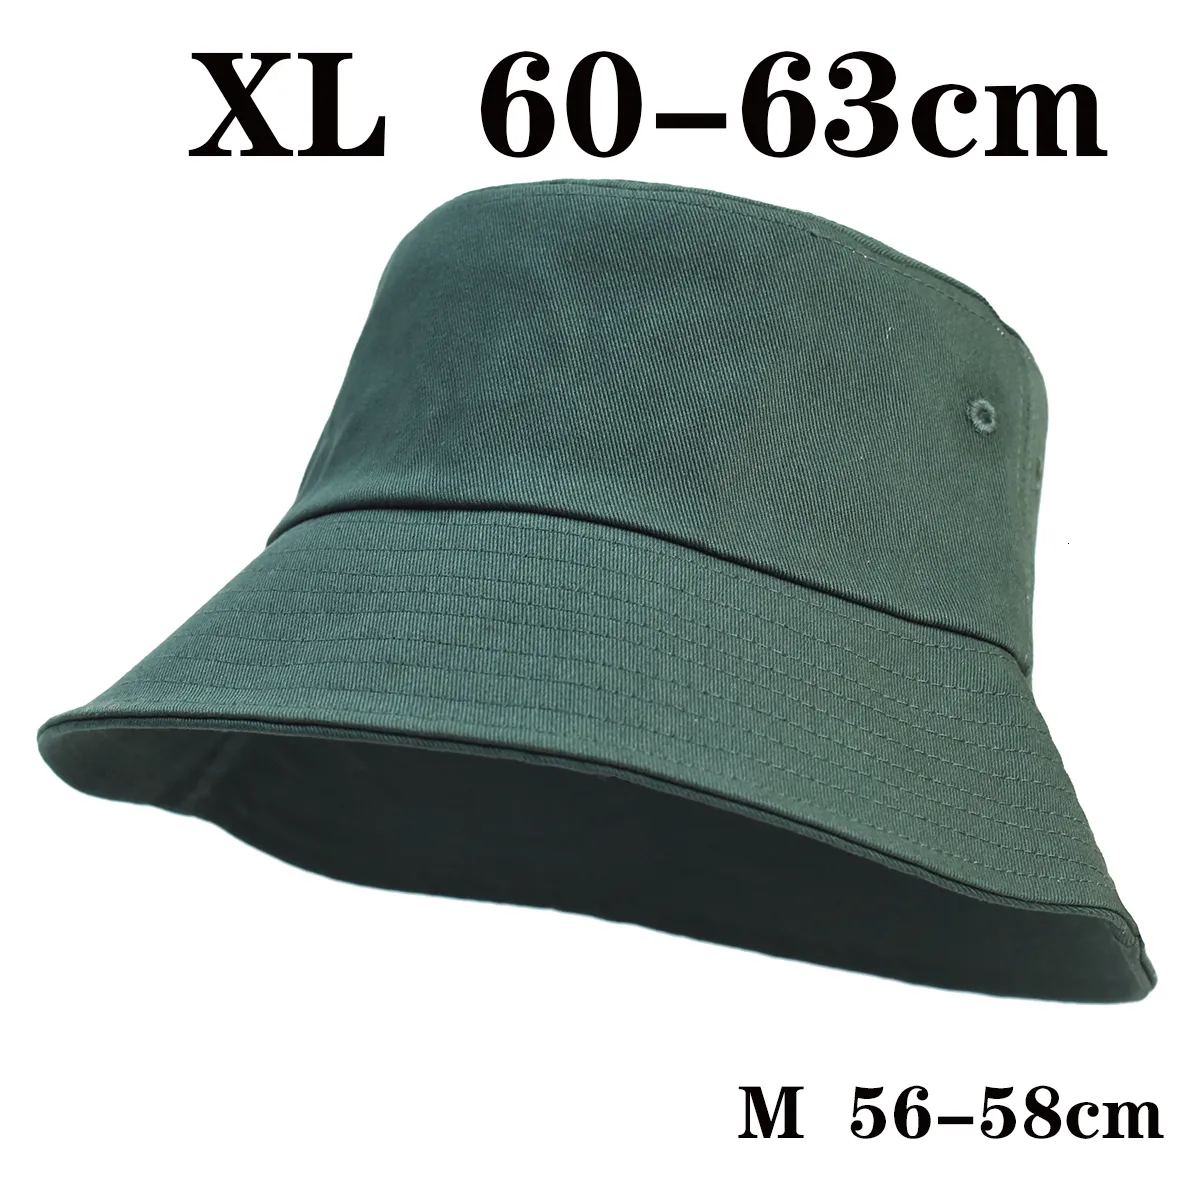 Pure Cotton Wide Brim Army Green Bucket Hat For Men And Women Large Size  Sun Hat, Blank Fisherman Hat With Panama Cap Plus Size 56 58cm 58 62cm Item  #230828 From Yao05, $7.74